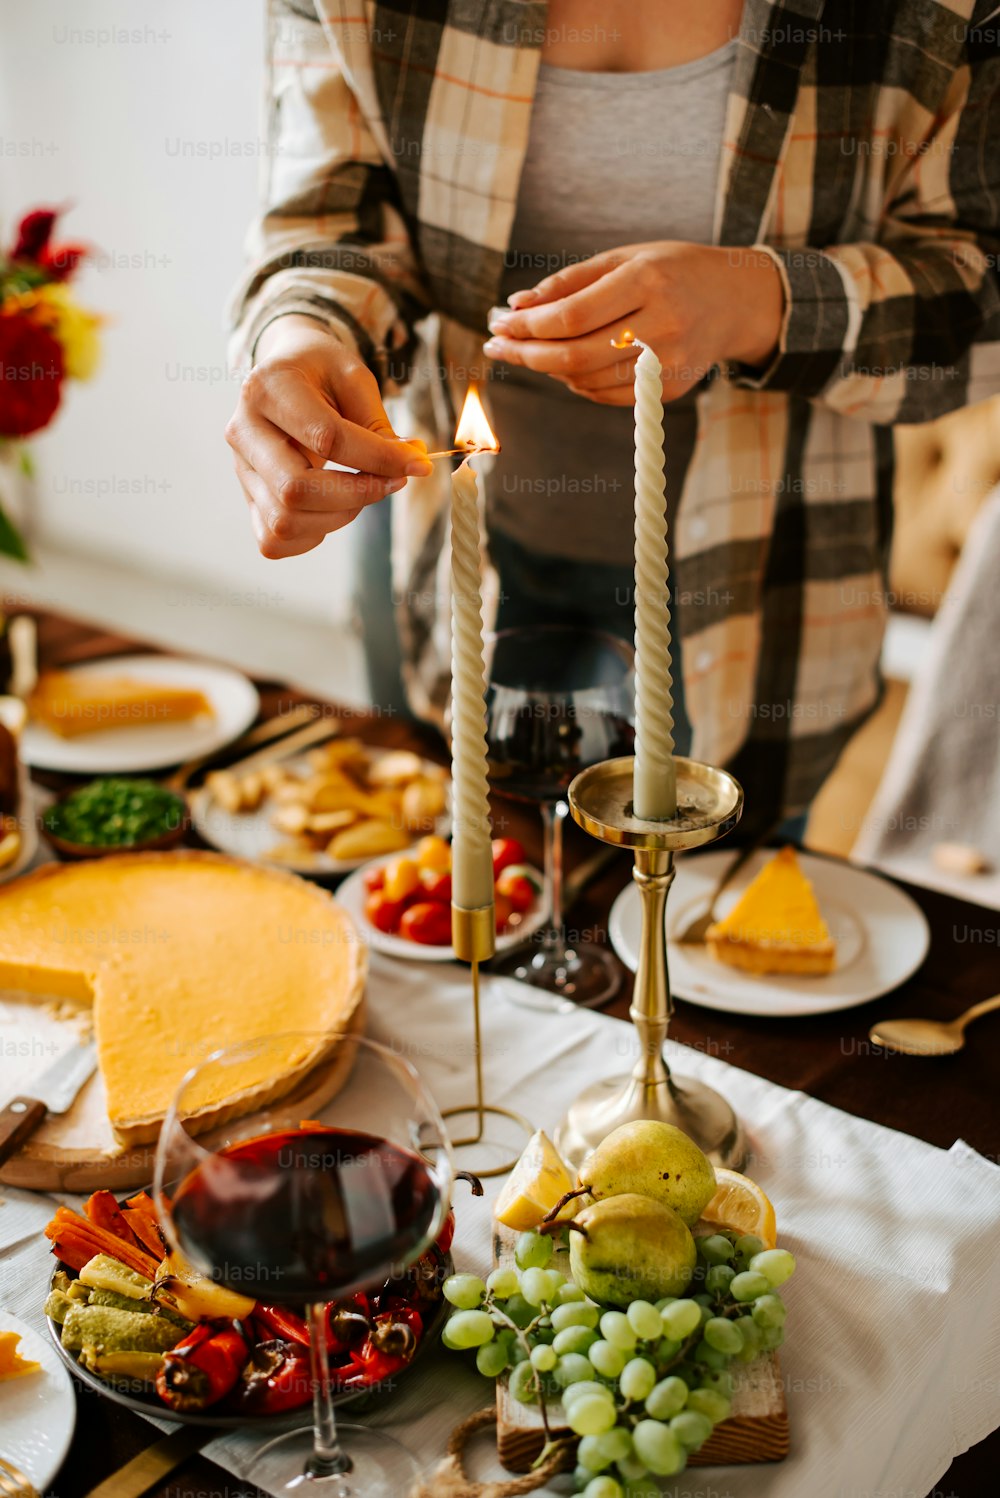 a person lighting a candle on a table with food